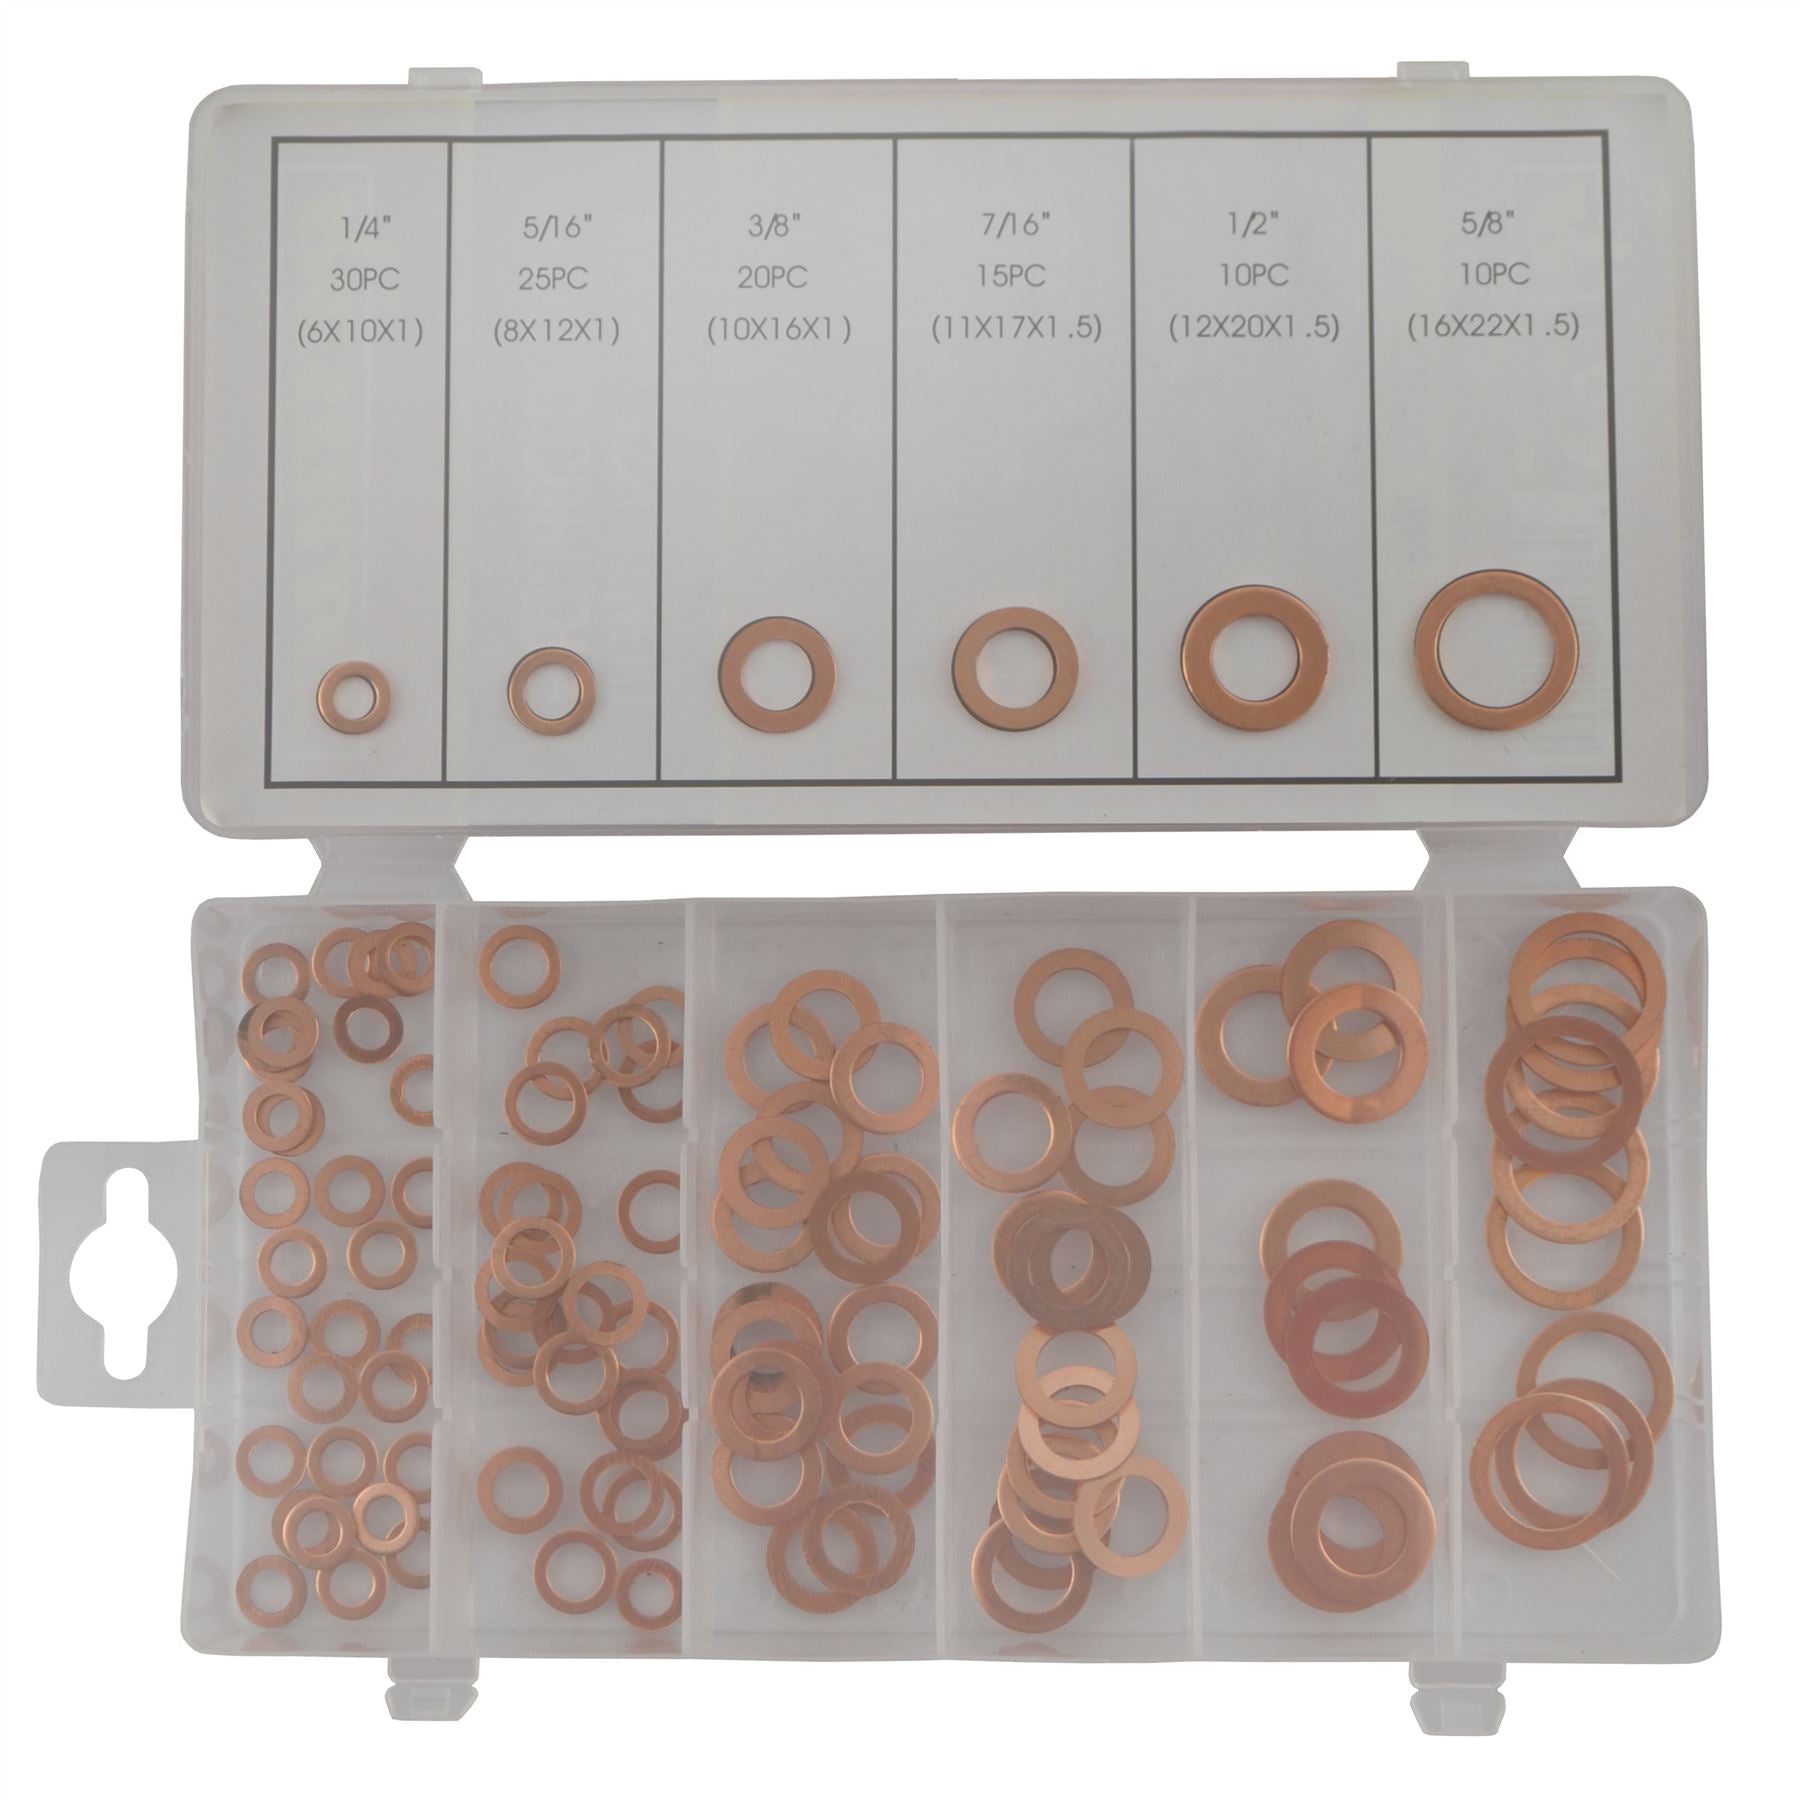 Solid Copper Washers Sump Plug Engine Washer Set Imp Metric M6 to M16 110pc